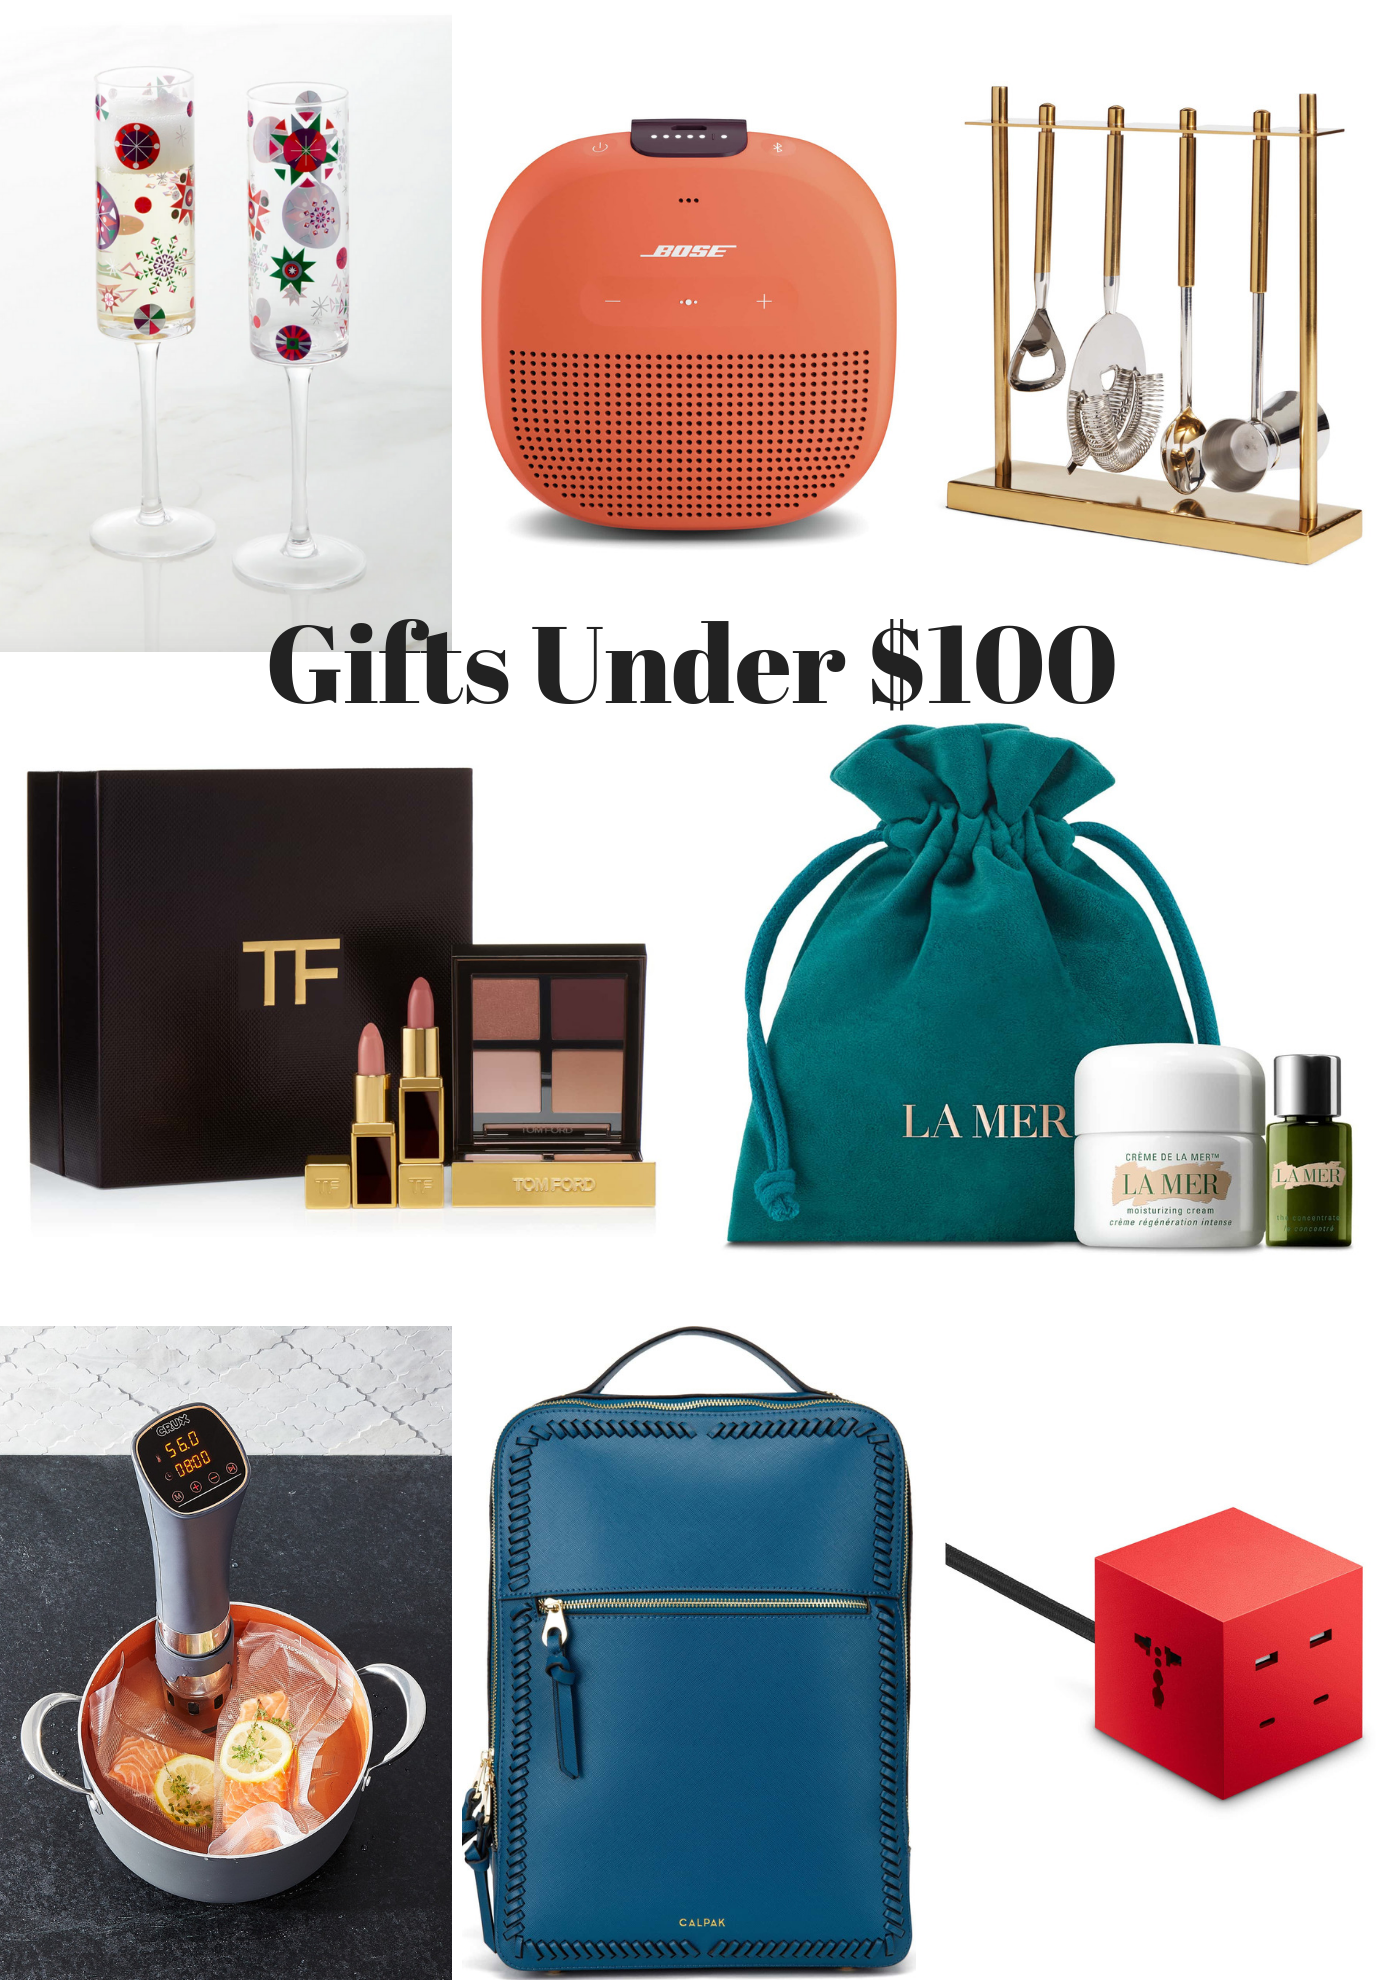 Gifts under $100 for her - Nordstrom, shopbop, amazon and ulta